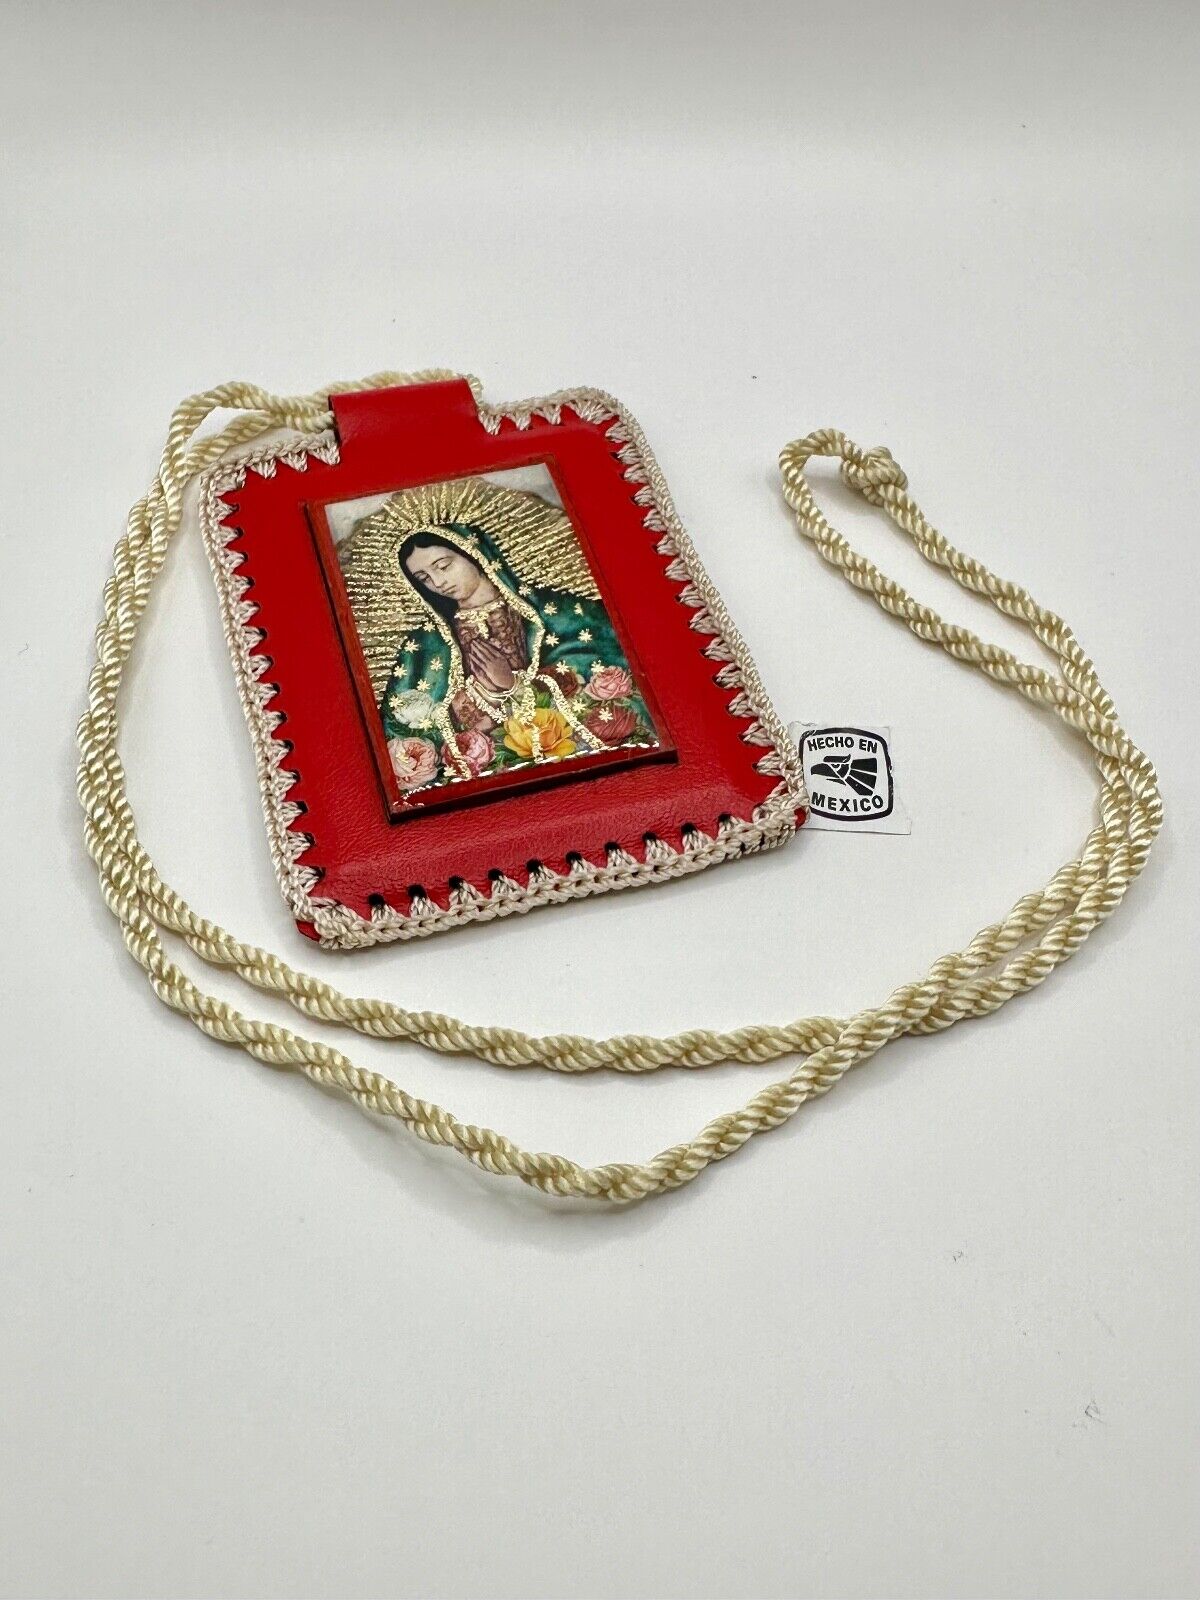 Escapulario Virgen De Guadalupe /our lady of Guadalupe Scapular gold and red